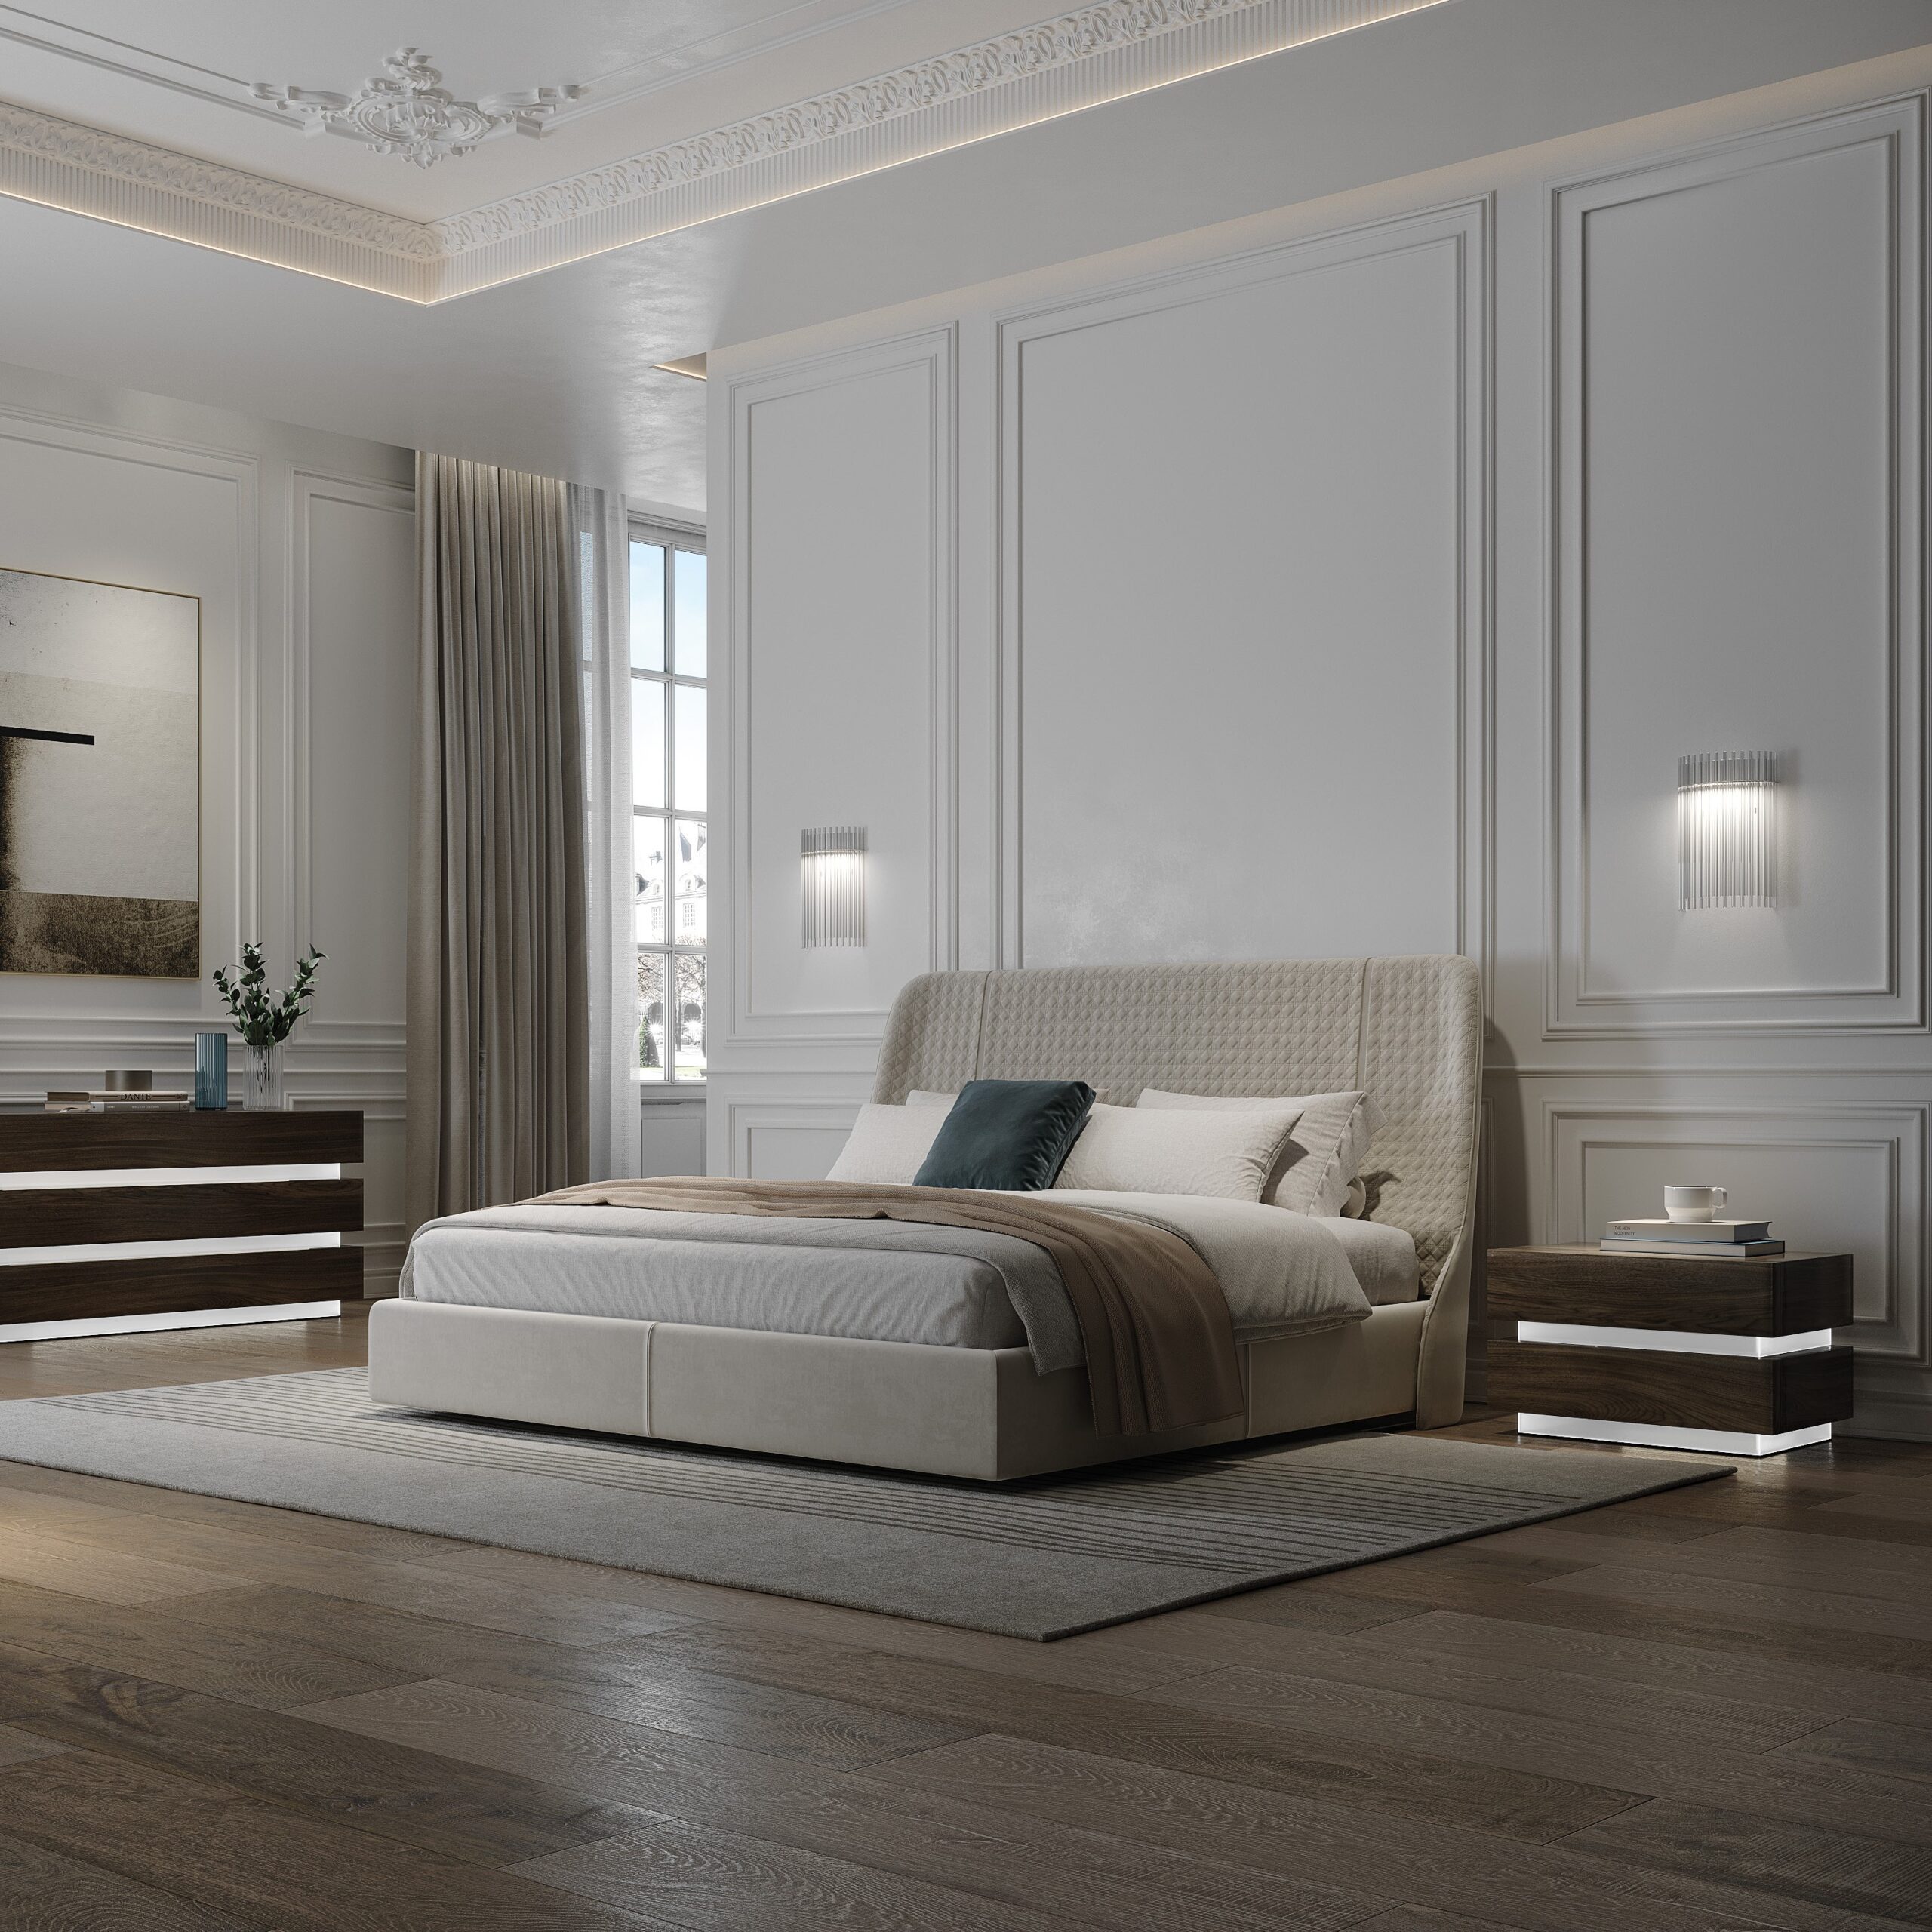 luxury furniture stores calgary night area bedrooms beds rialto xl bed reflex angelo prianera luxuries of europe